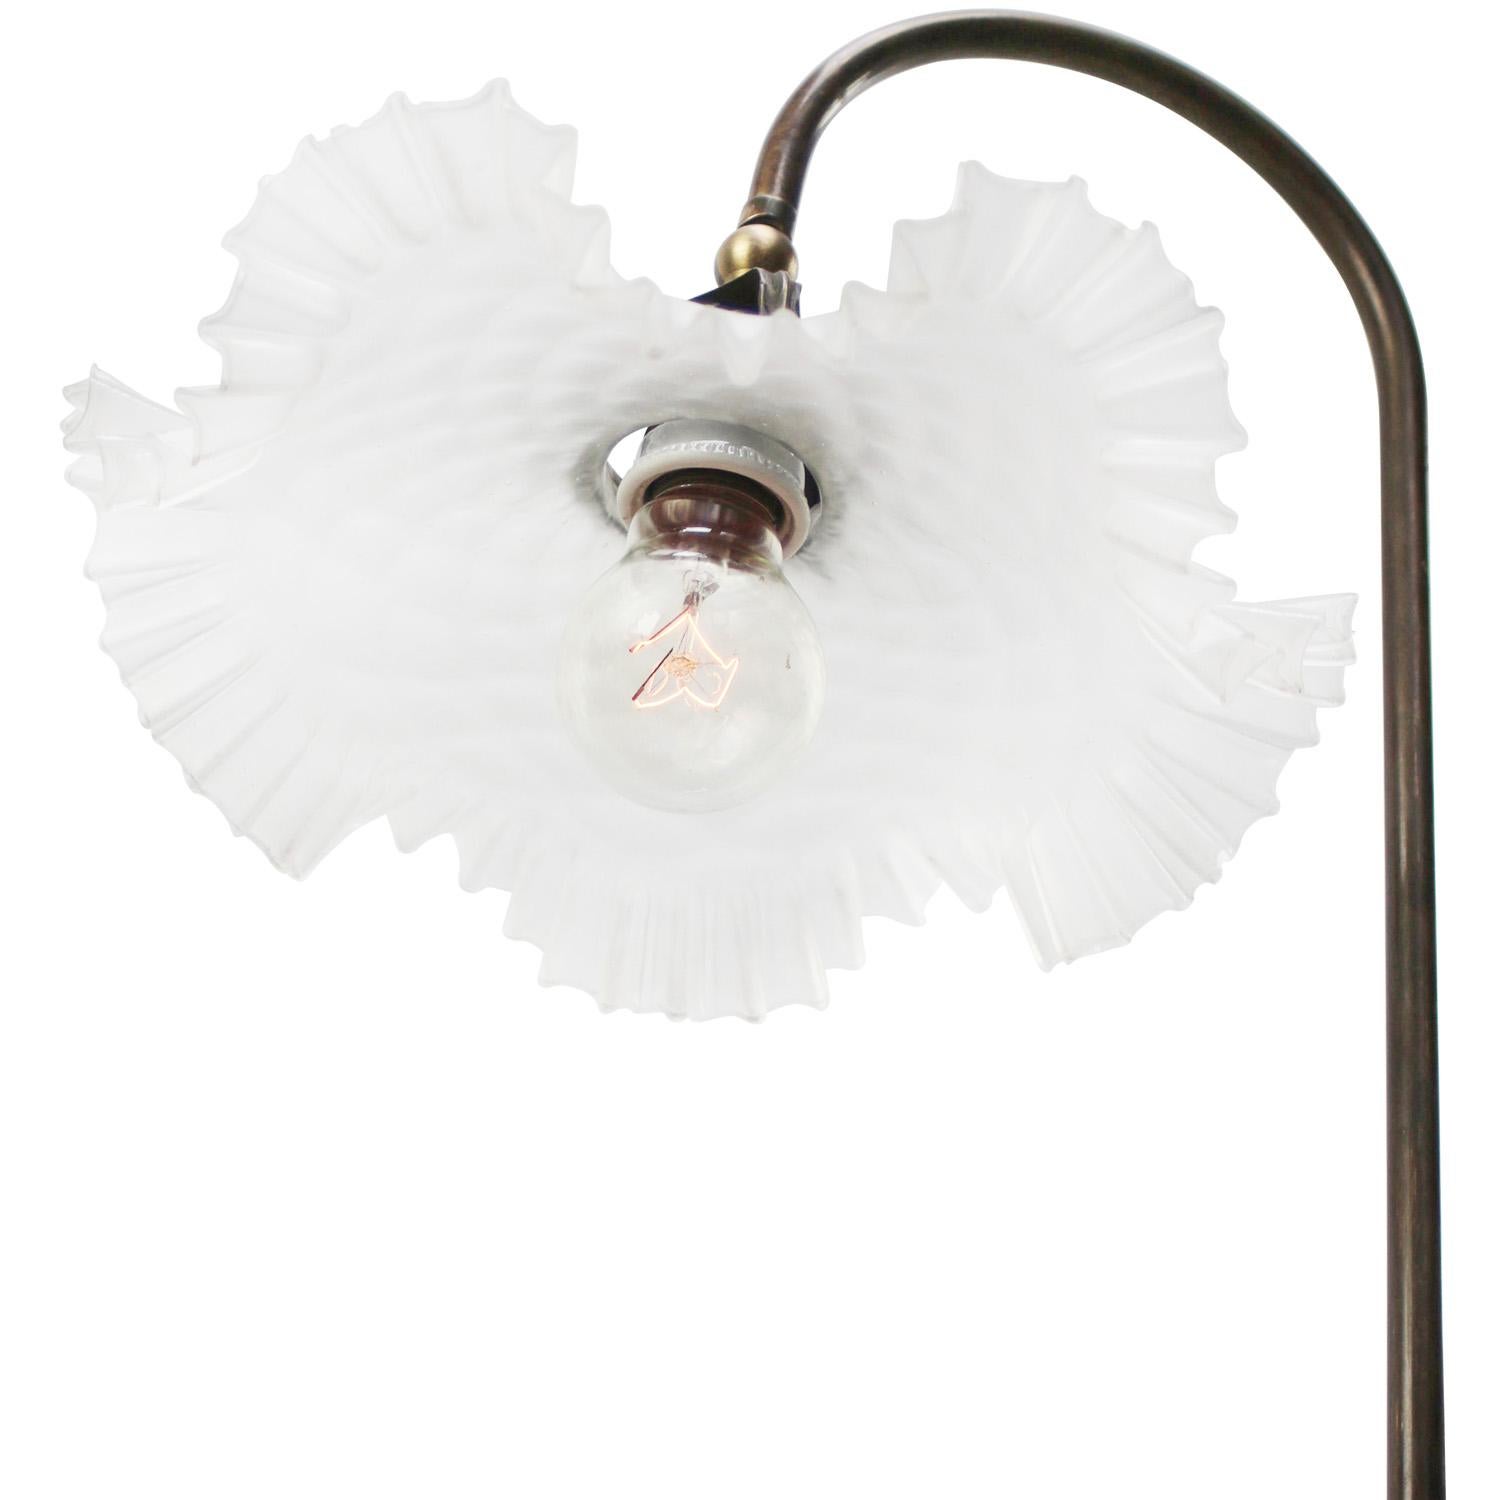 French glass, brass desk light / table lamp
2,5 meter black cotton wire, plug and switch

Available with UK / US plug

Priced per individual item. All lamps have been made suitable by international standards for incandescent light bulbs,